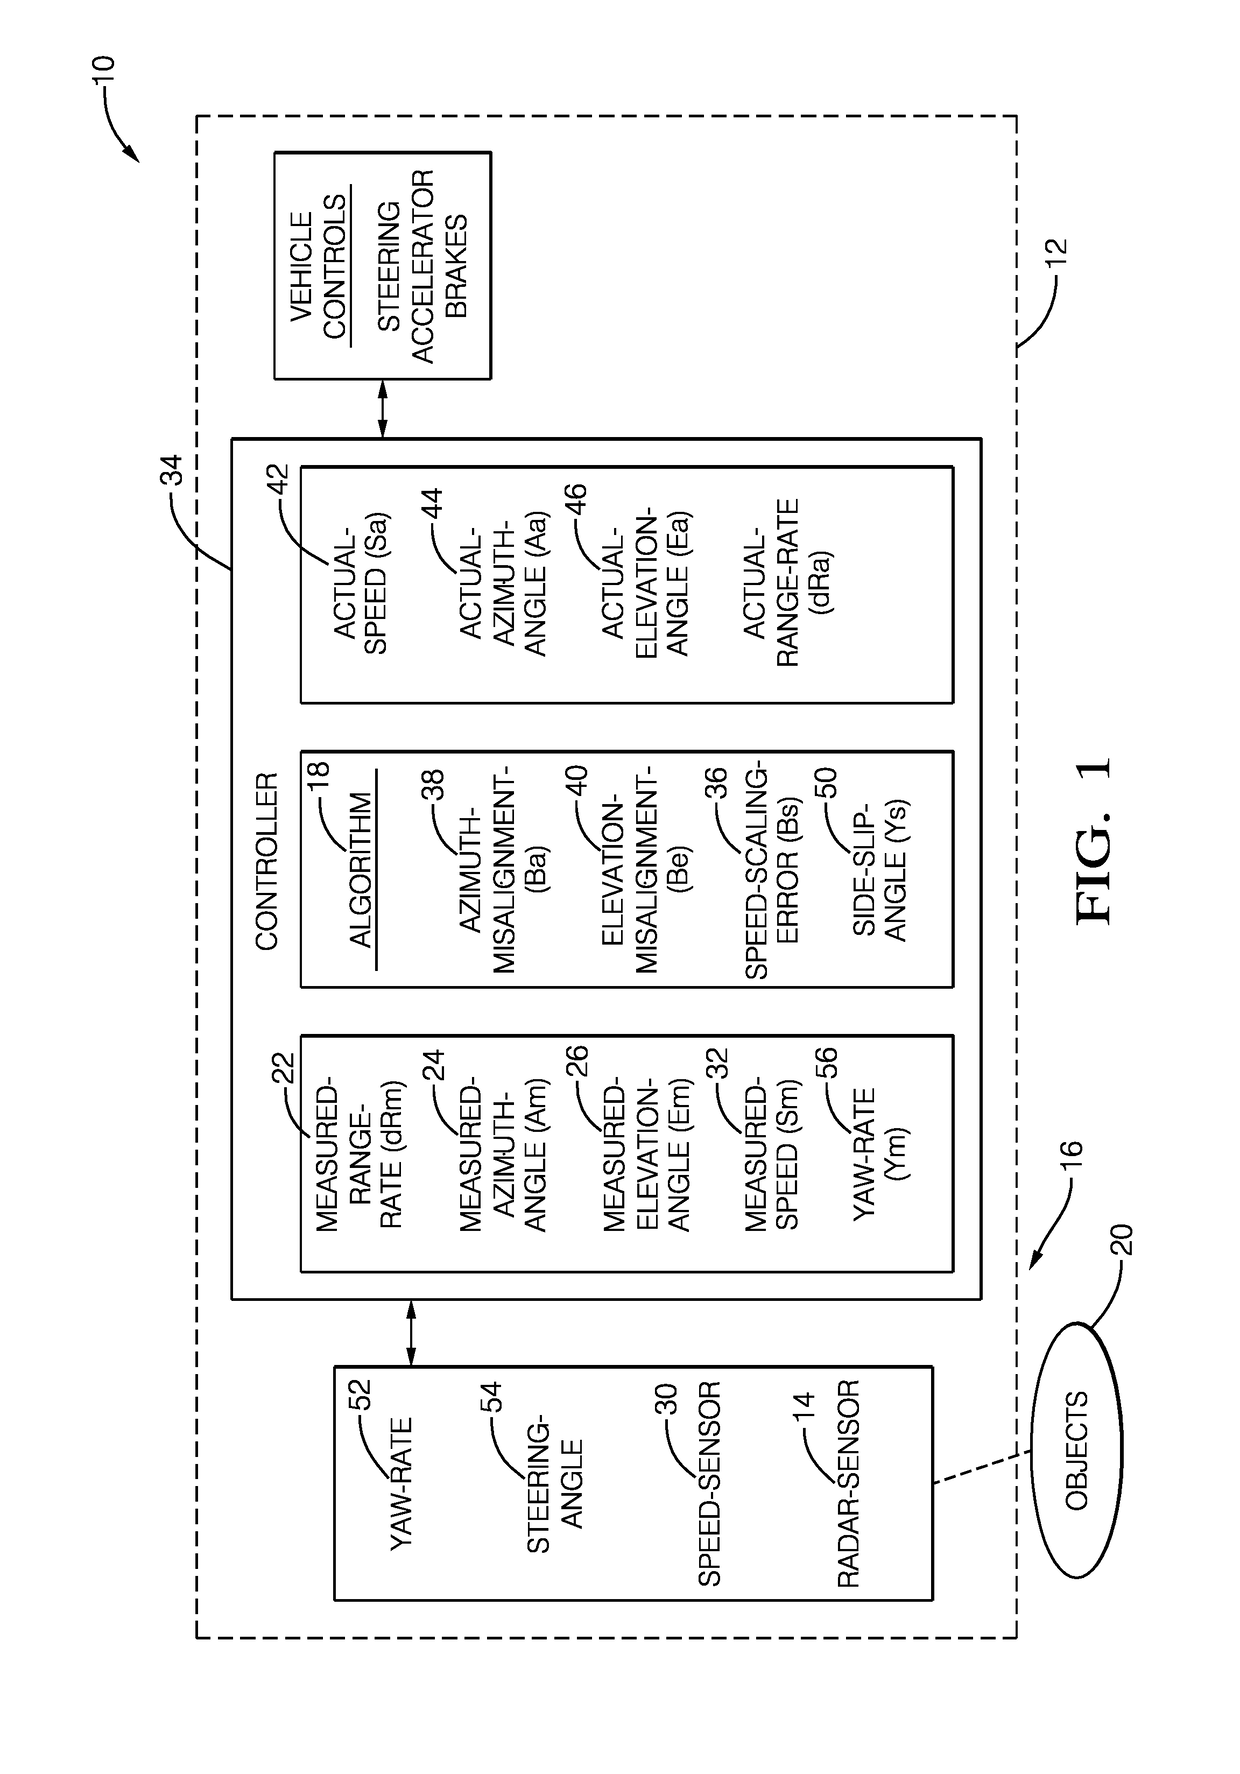 Automated vehicle radar system with auto-alignment for azimuth, elevation, and vehicle speed-scaling-error